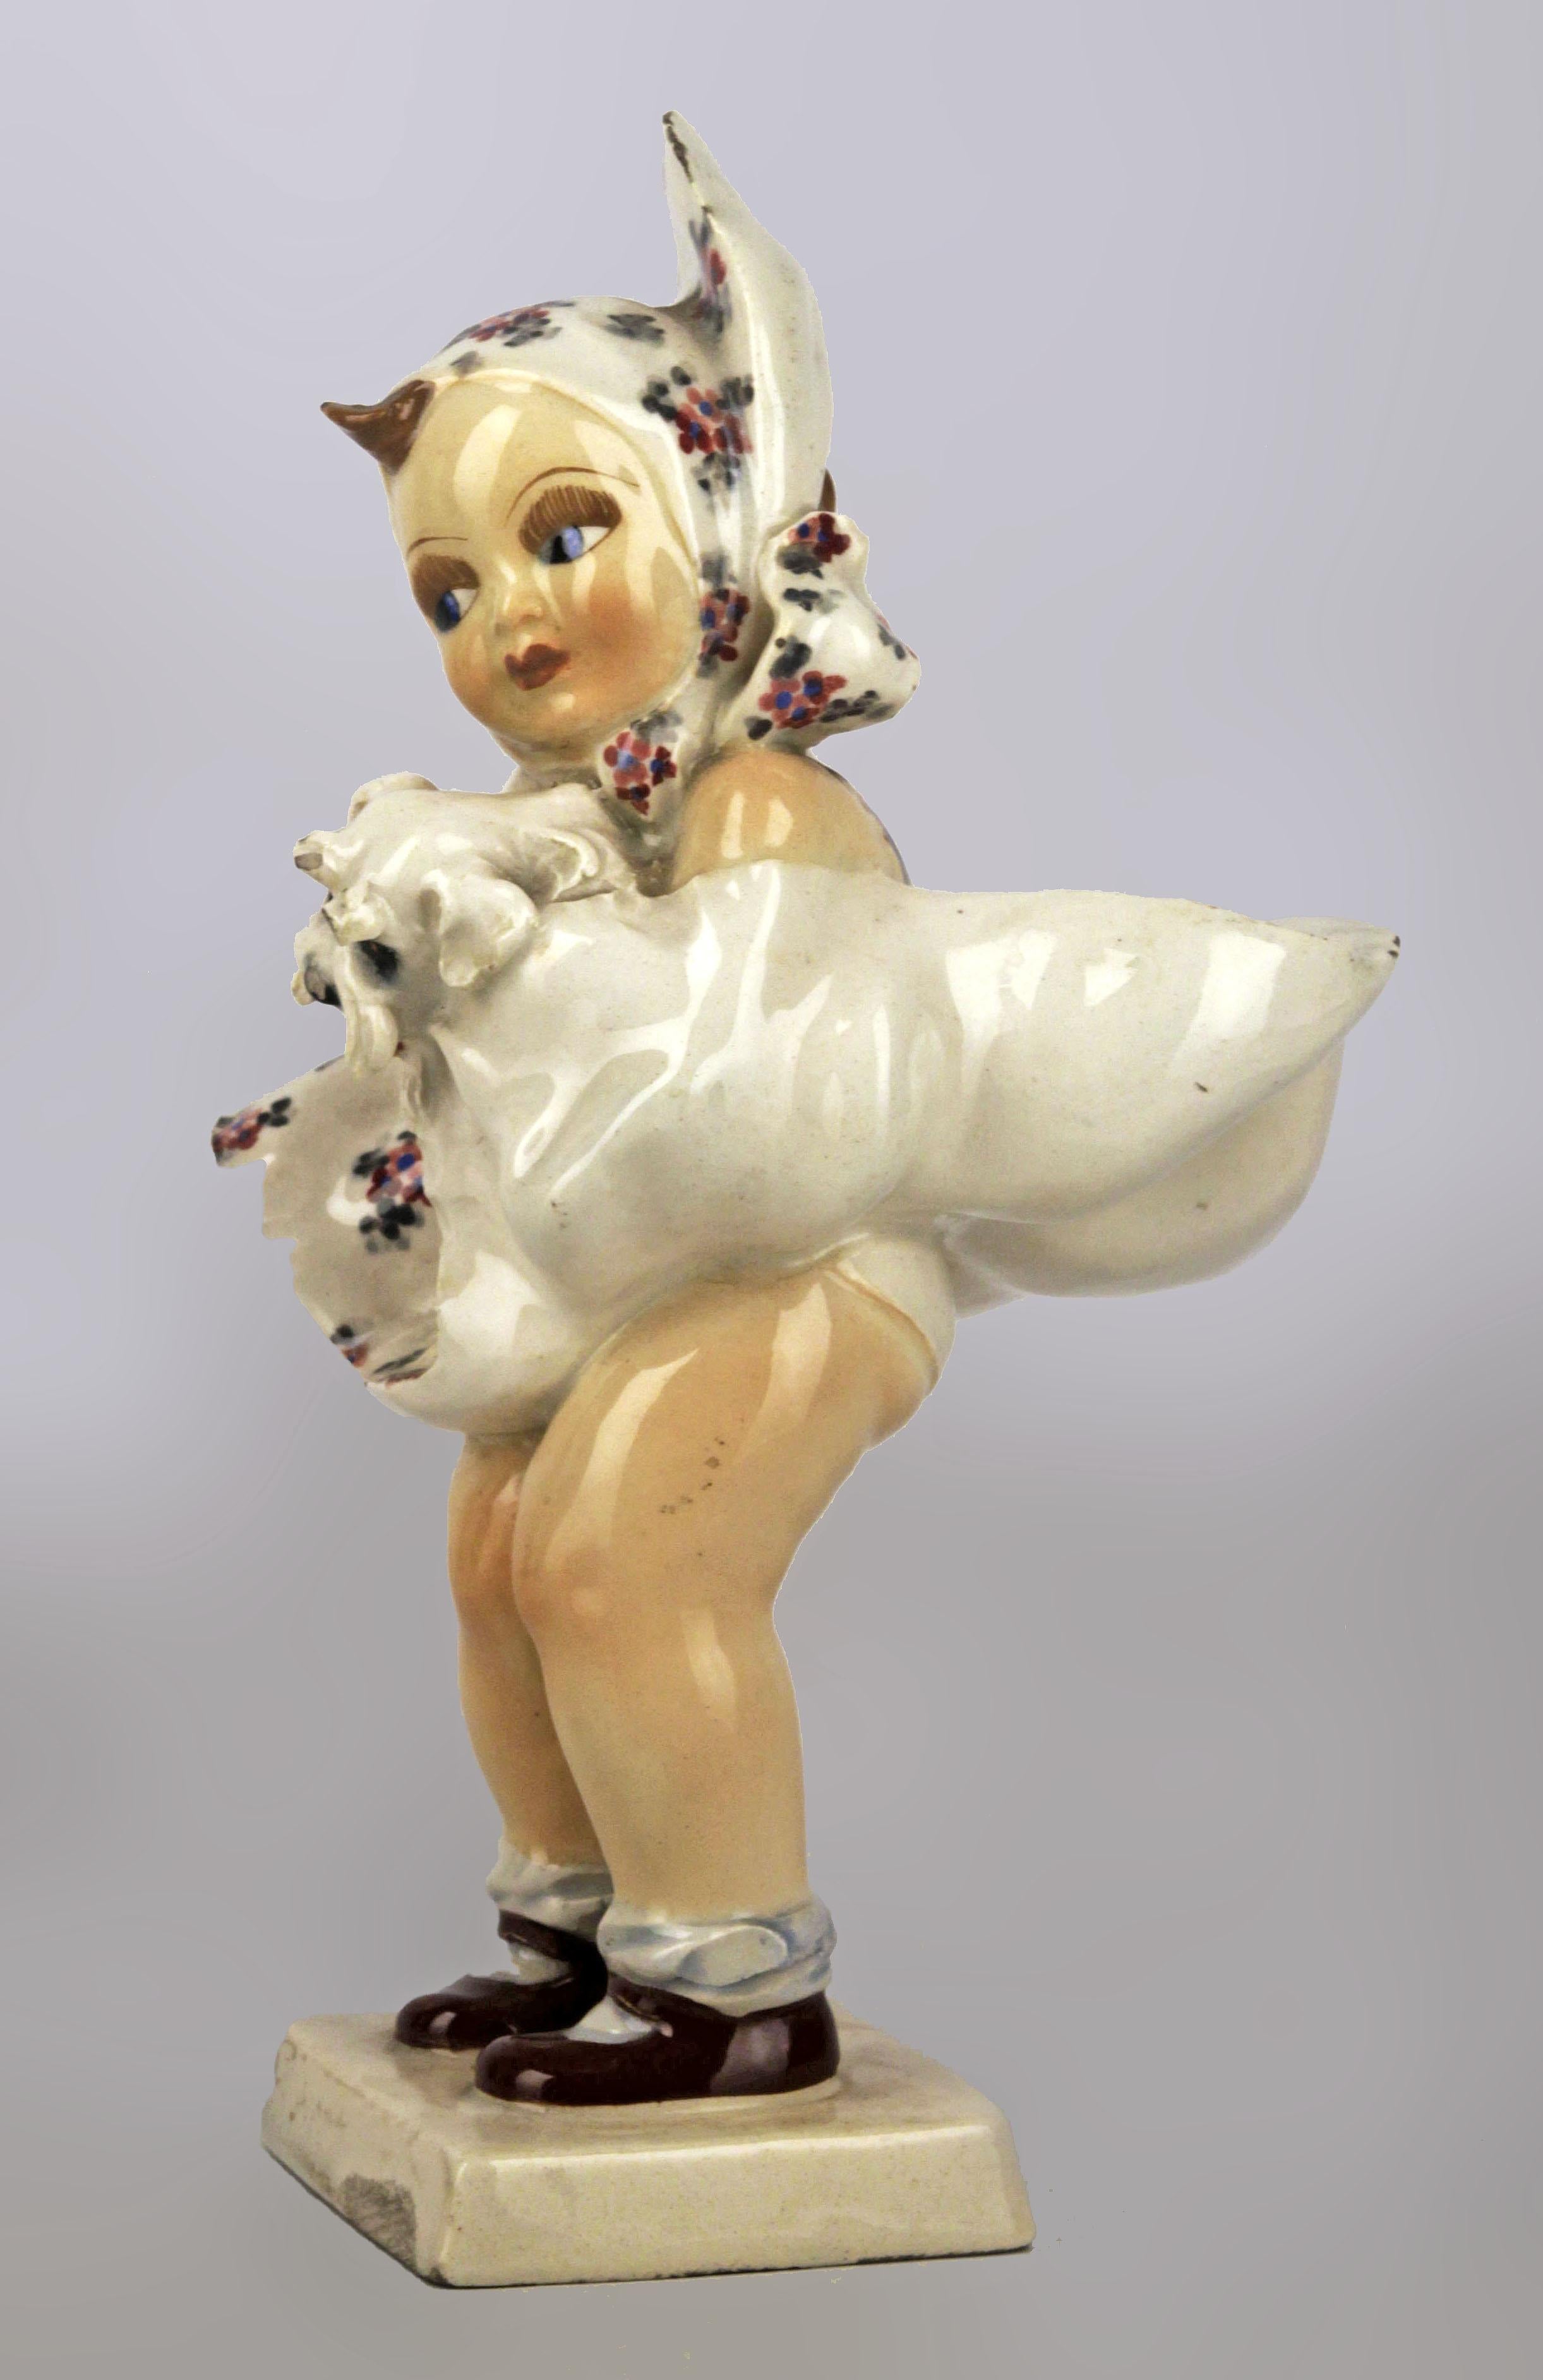 Rococo Revival 1950s Torino Hand-Painted Glazed Ceramic Sculpture of Girl and Dog by C. Mollica For Sale